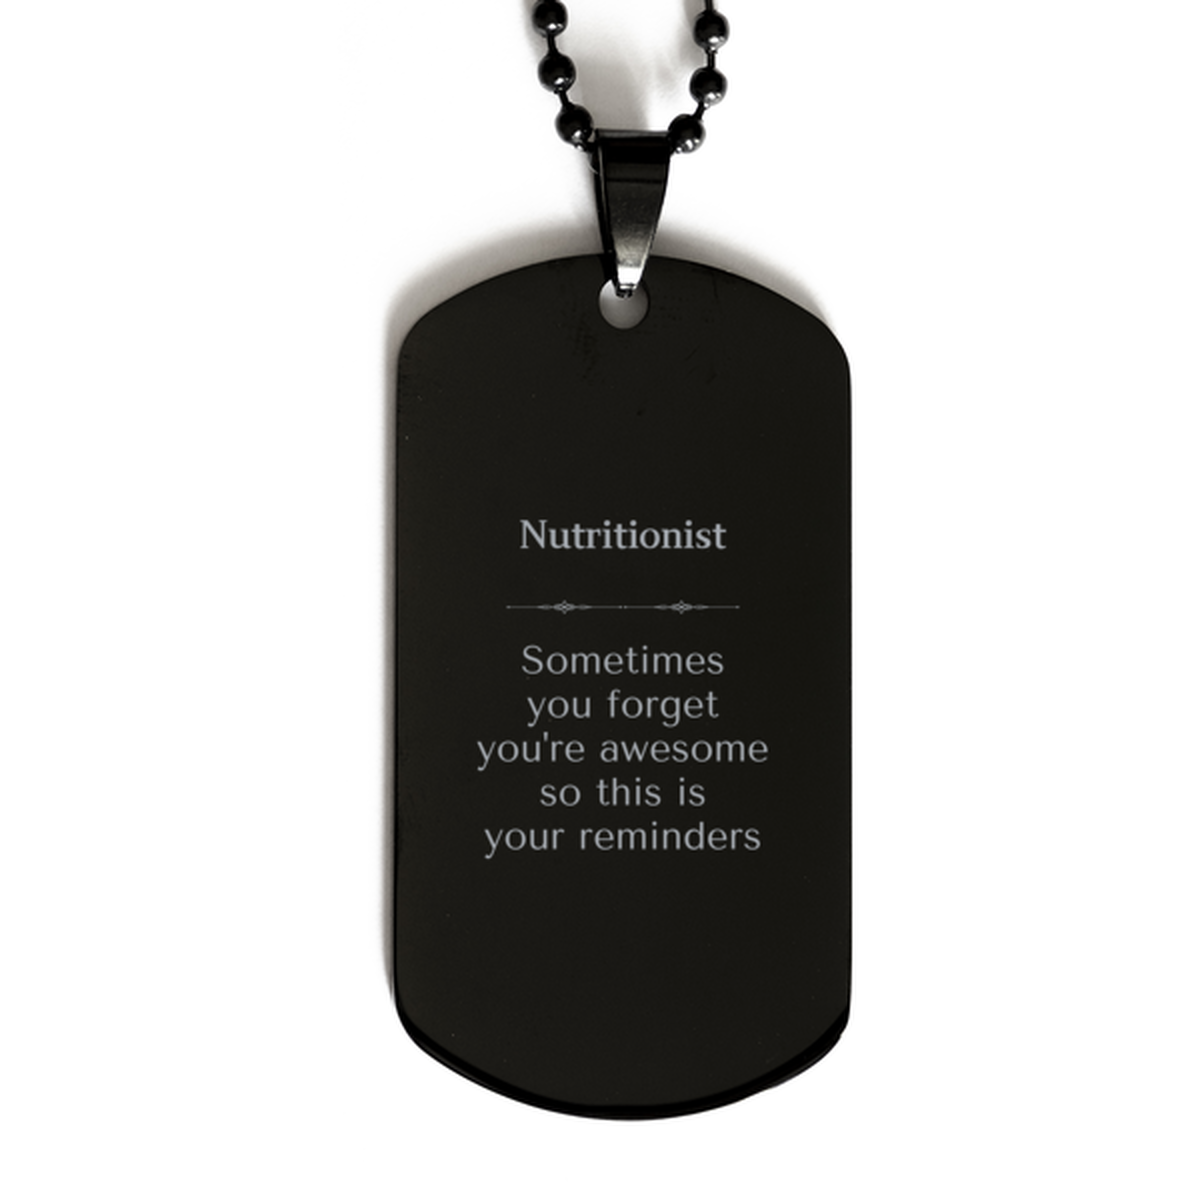 Sentimental Nutritionist Black Dog Tag, Nutritionist Sometimes you forget you're awesome so this is your reminders, Graduation Christmas Birthday Gifts for Nutritionist, Men, Women, Coworkers